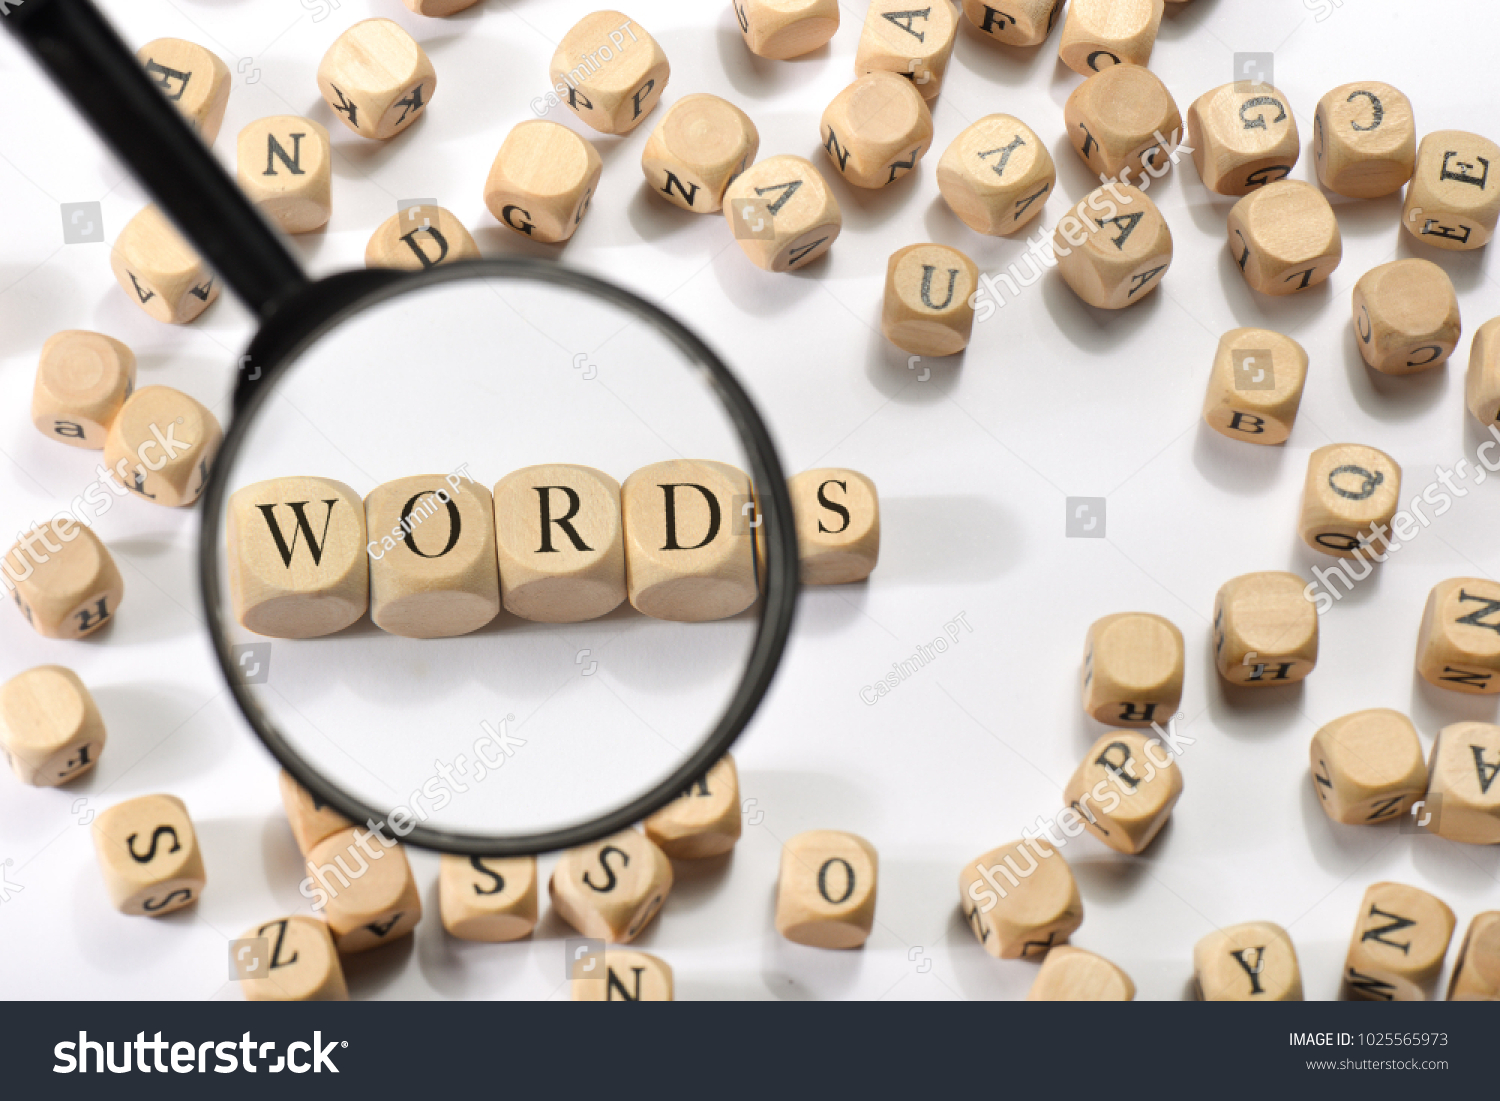 Words word on wooden cubes. Words concept #1025565973